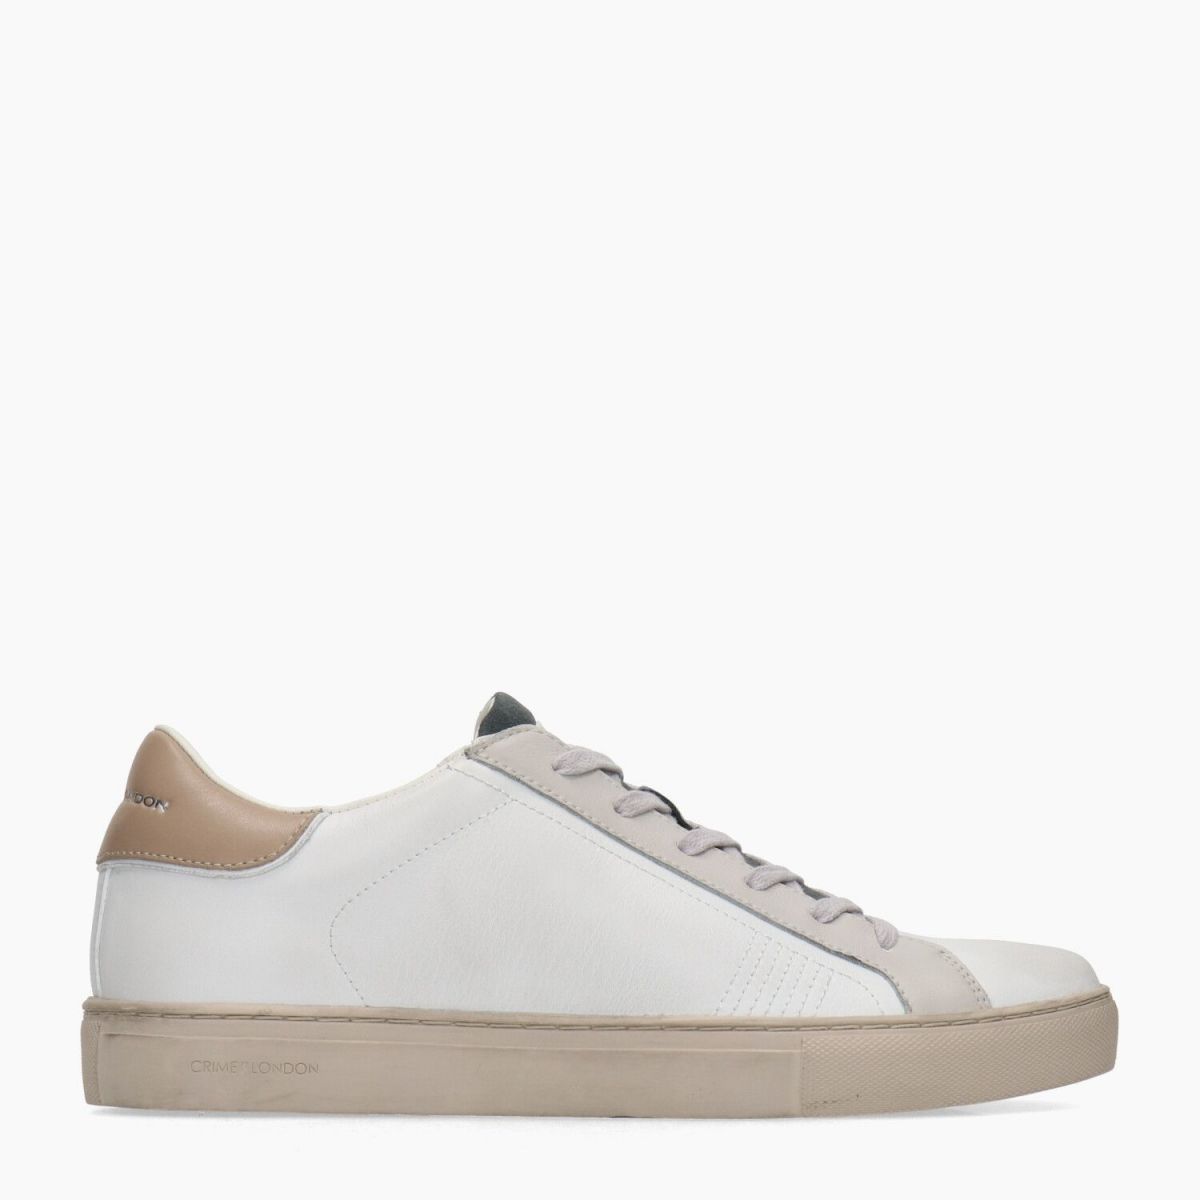 Crime London Sneakers Low Top Essential Bianco 16906PP5-BIANCO-023